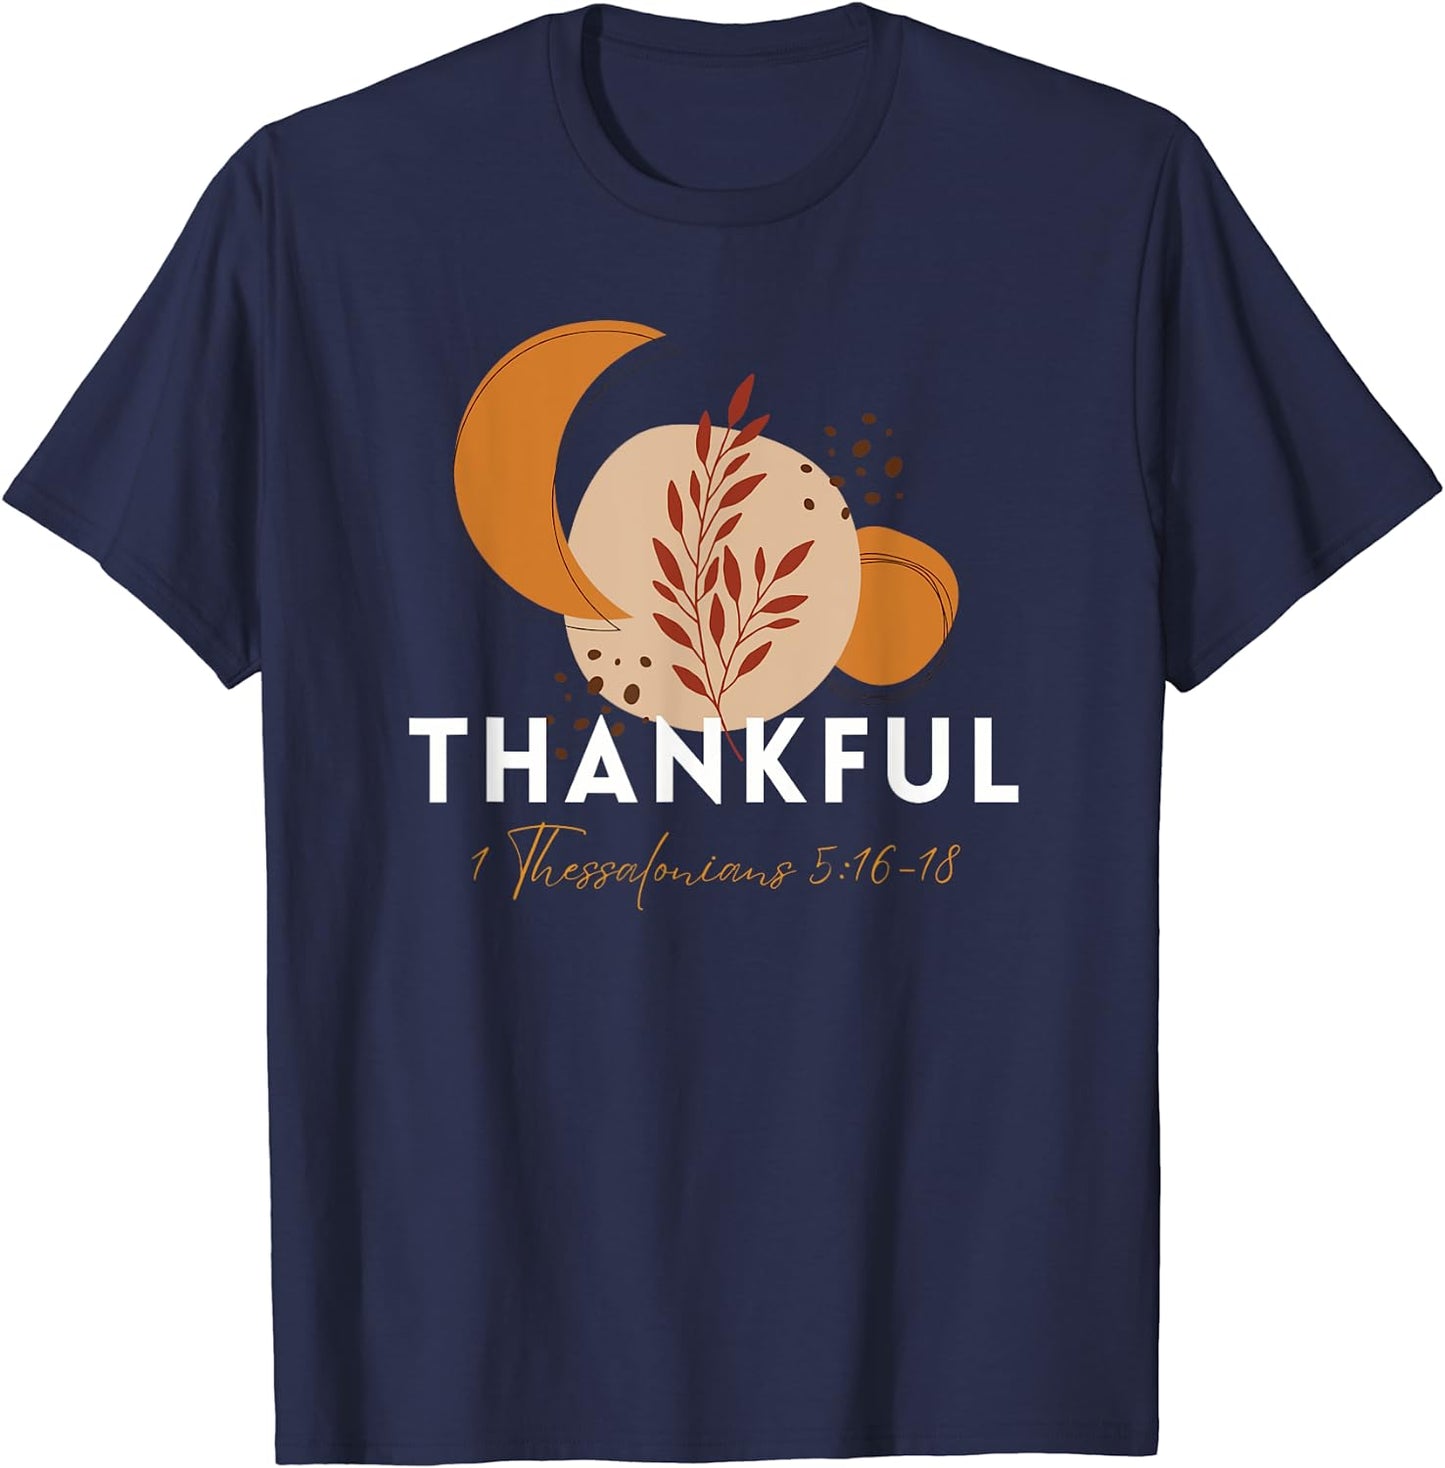 Thankful - Standard T-Shirt - Fun and Inspirational Design by Crucial Key